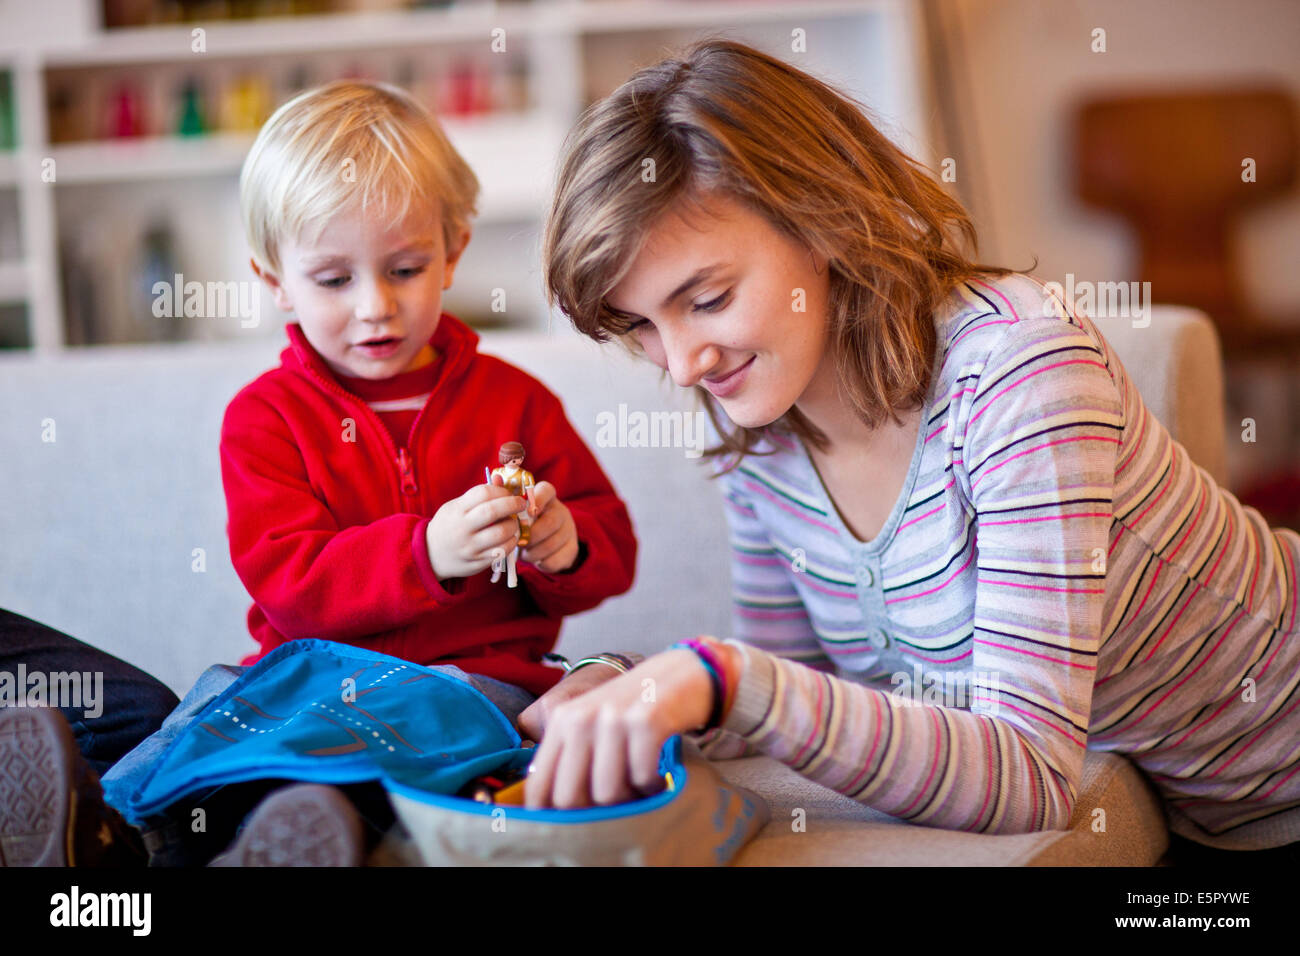 Teenage girl and 3-year-old boy playing with figurines. Stock Photo